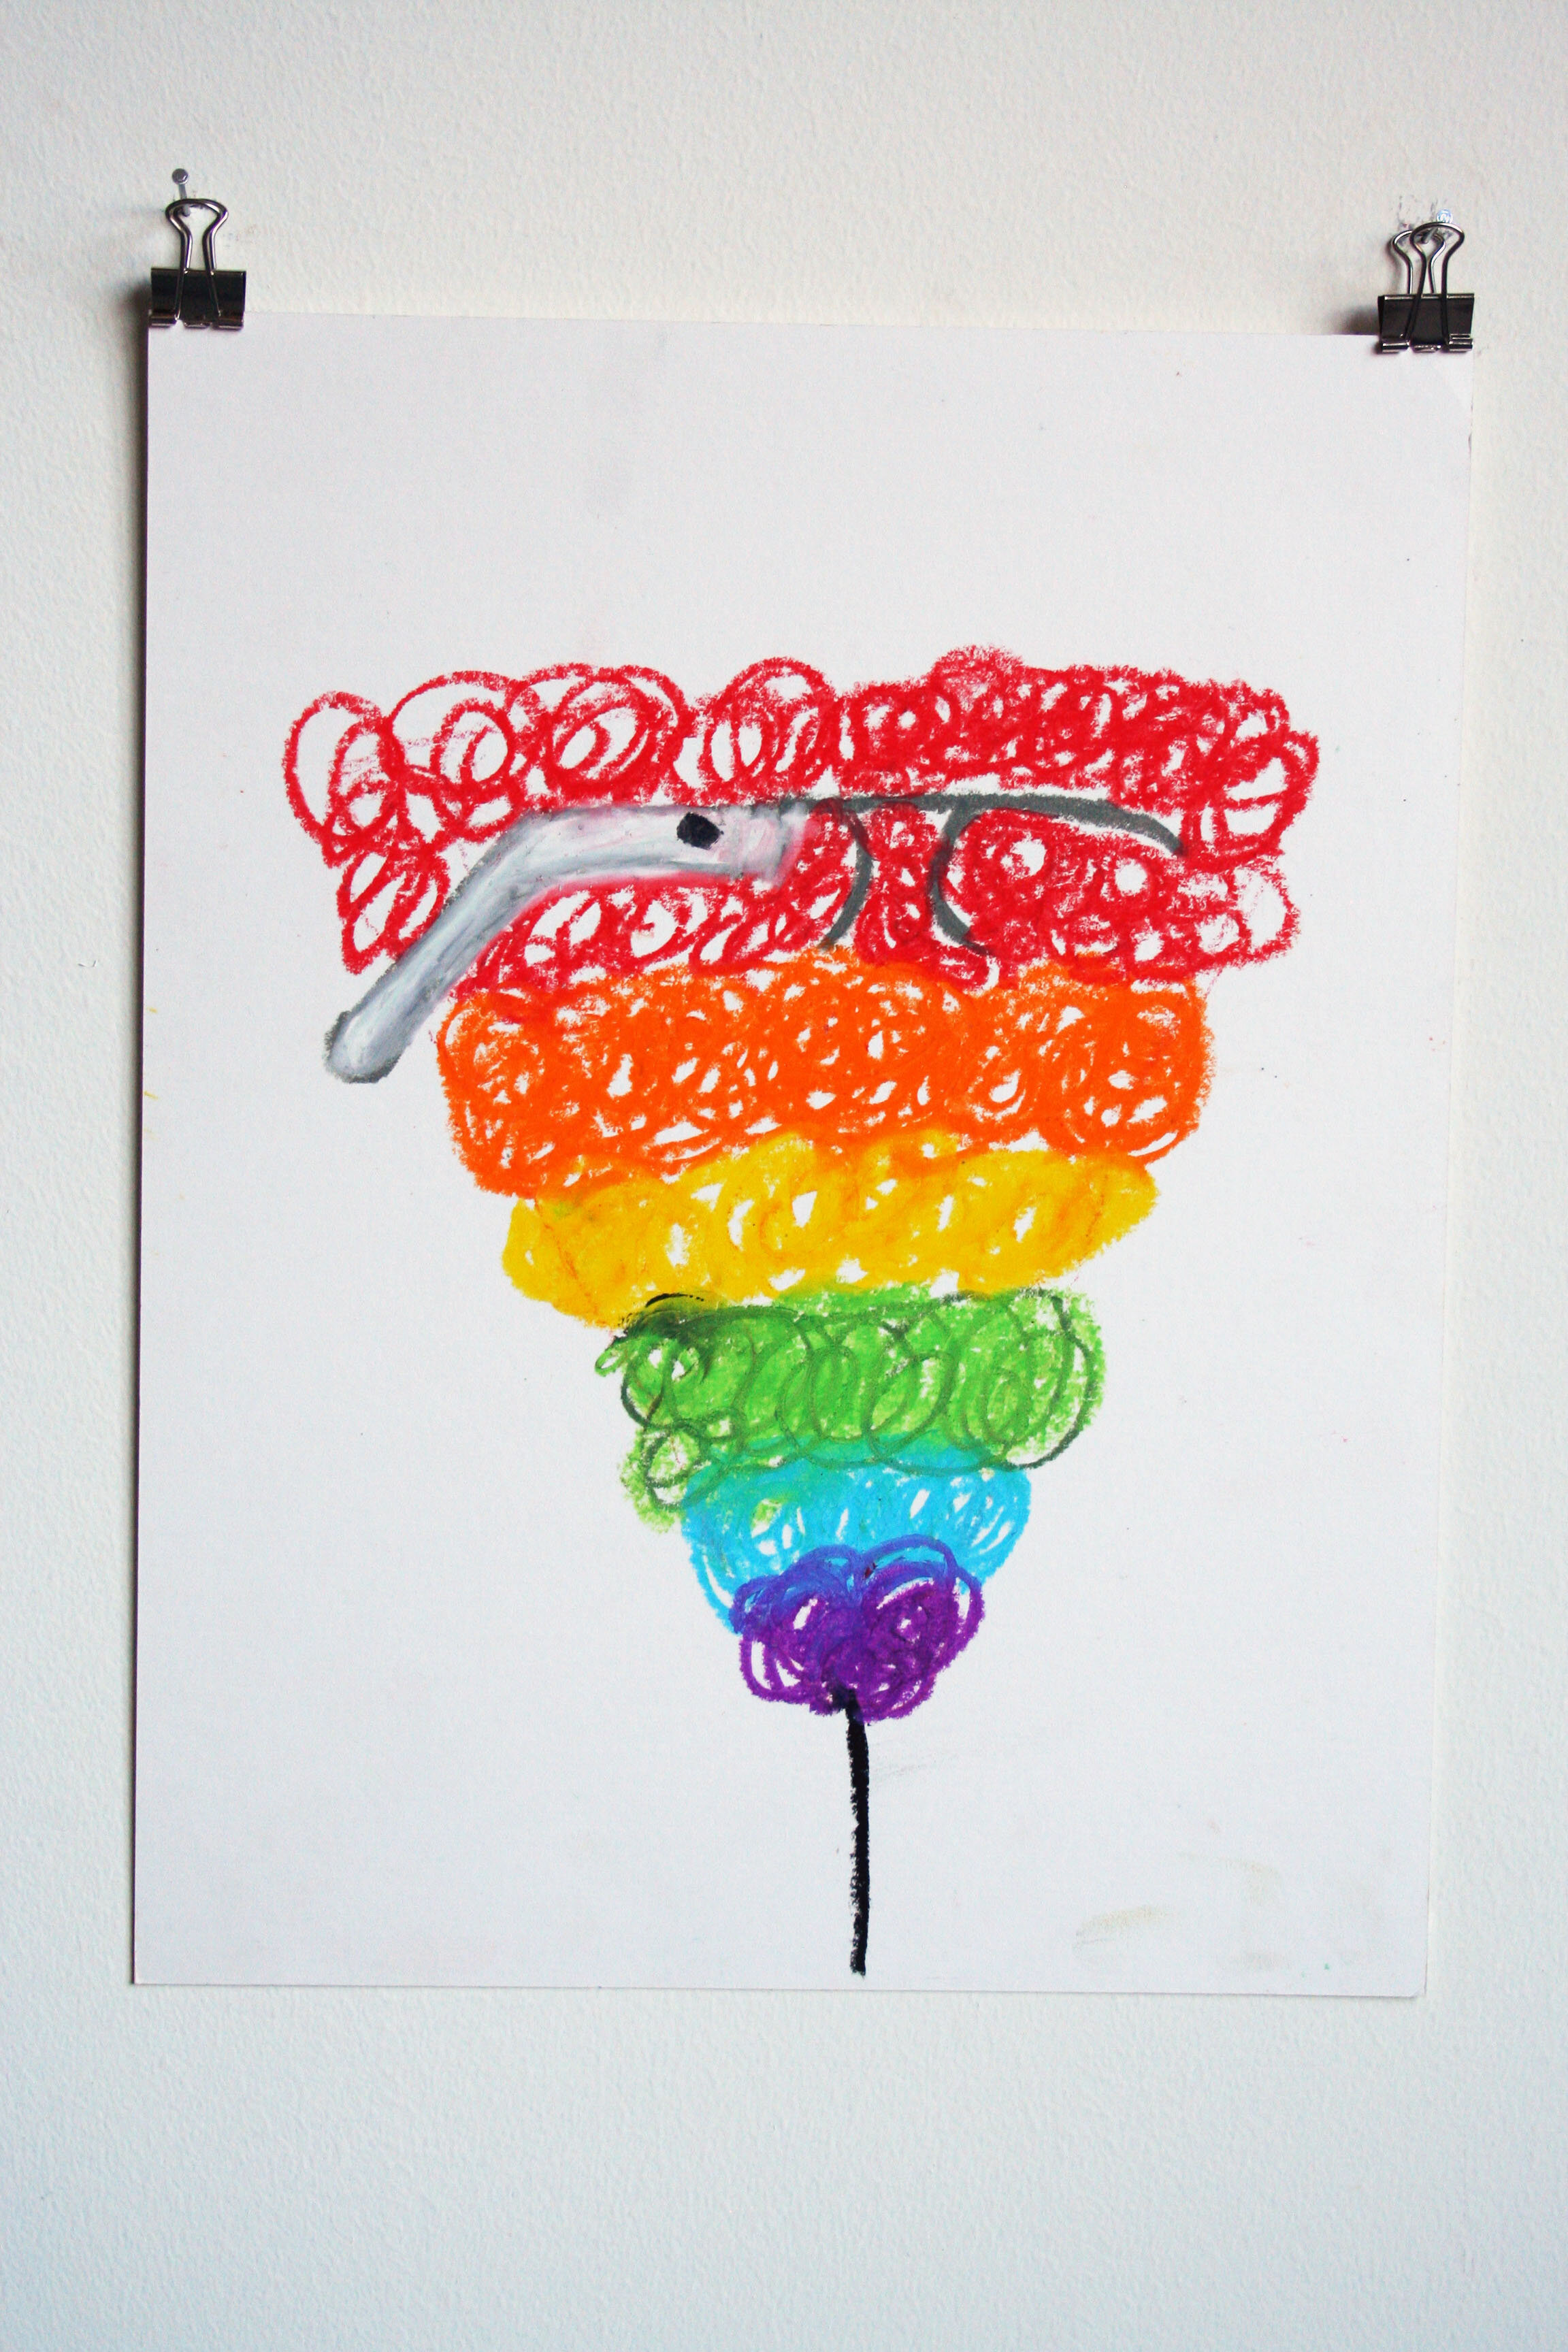   Rainbow Pubes Wearing Google Glass,  2015  14 x 11 inches (35.56 x 27.94 cm.)  Oil pastel on paper 